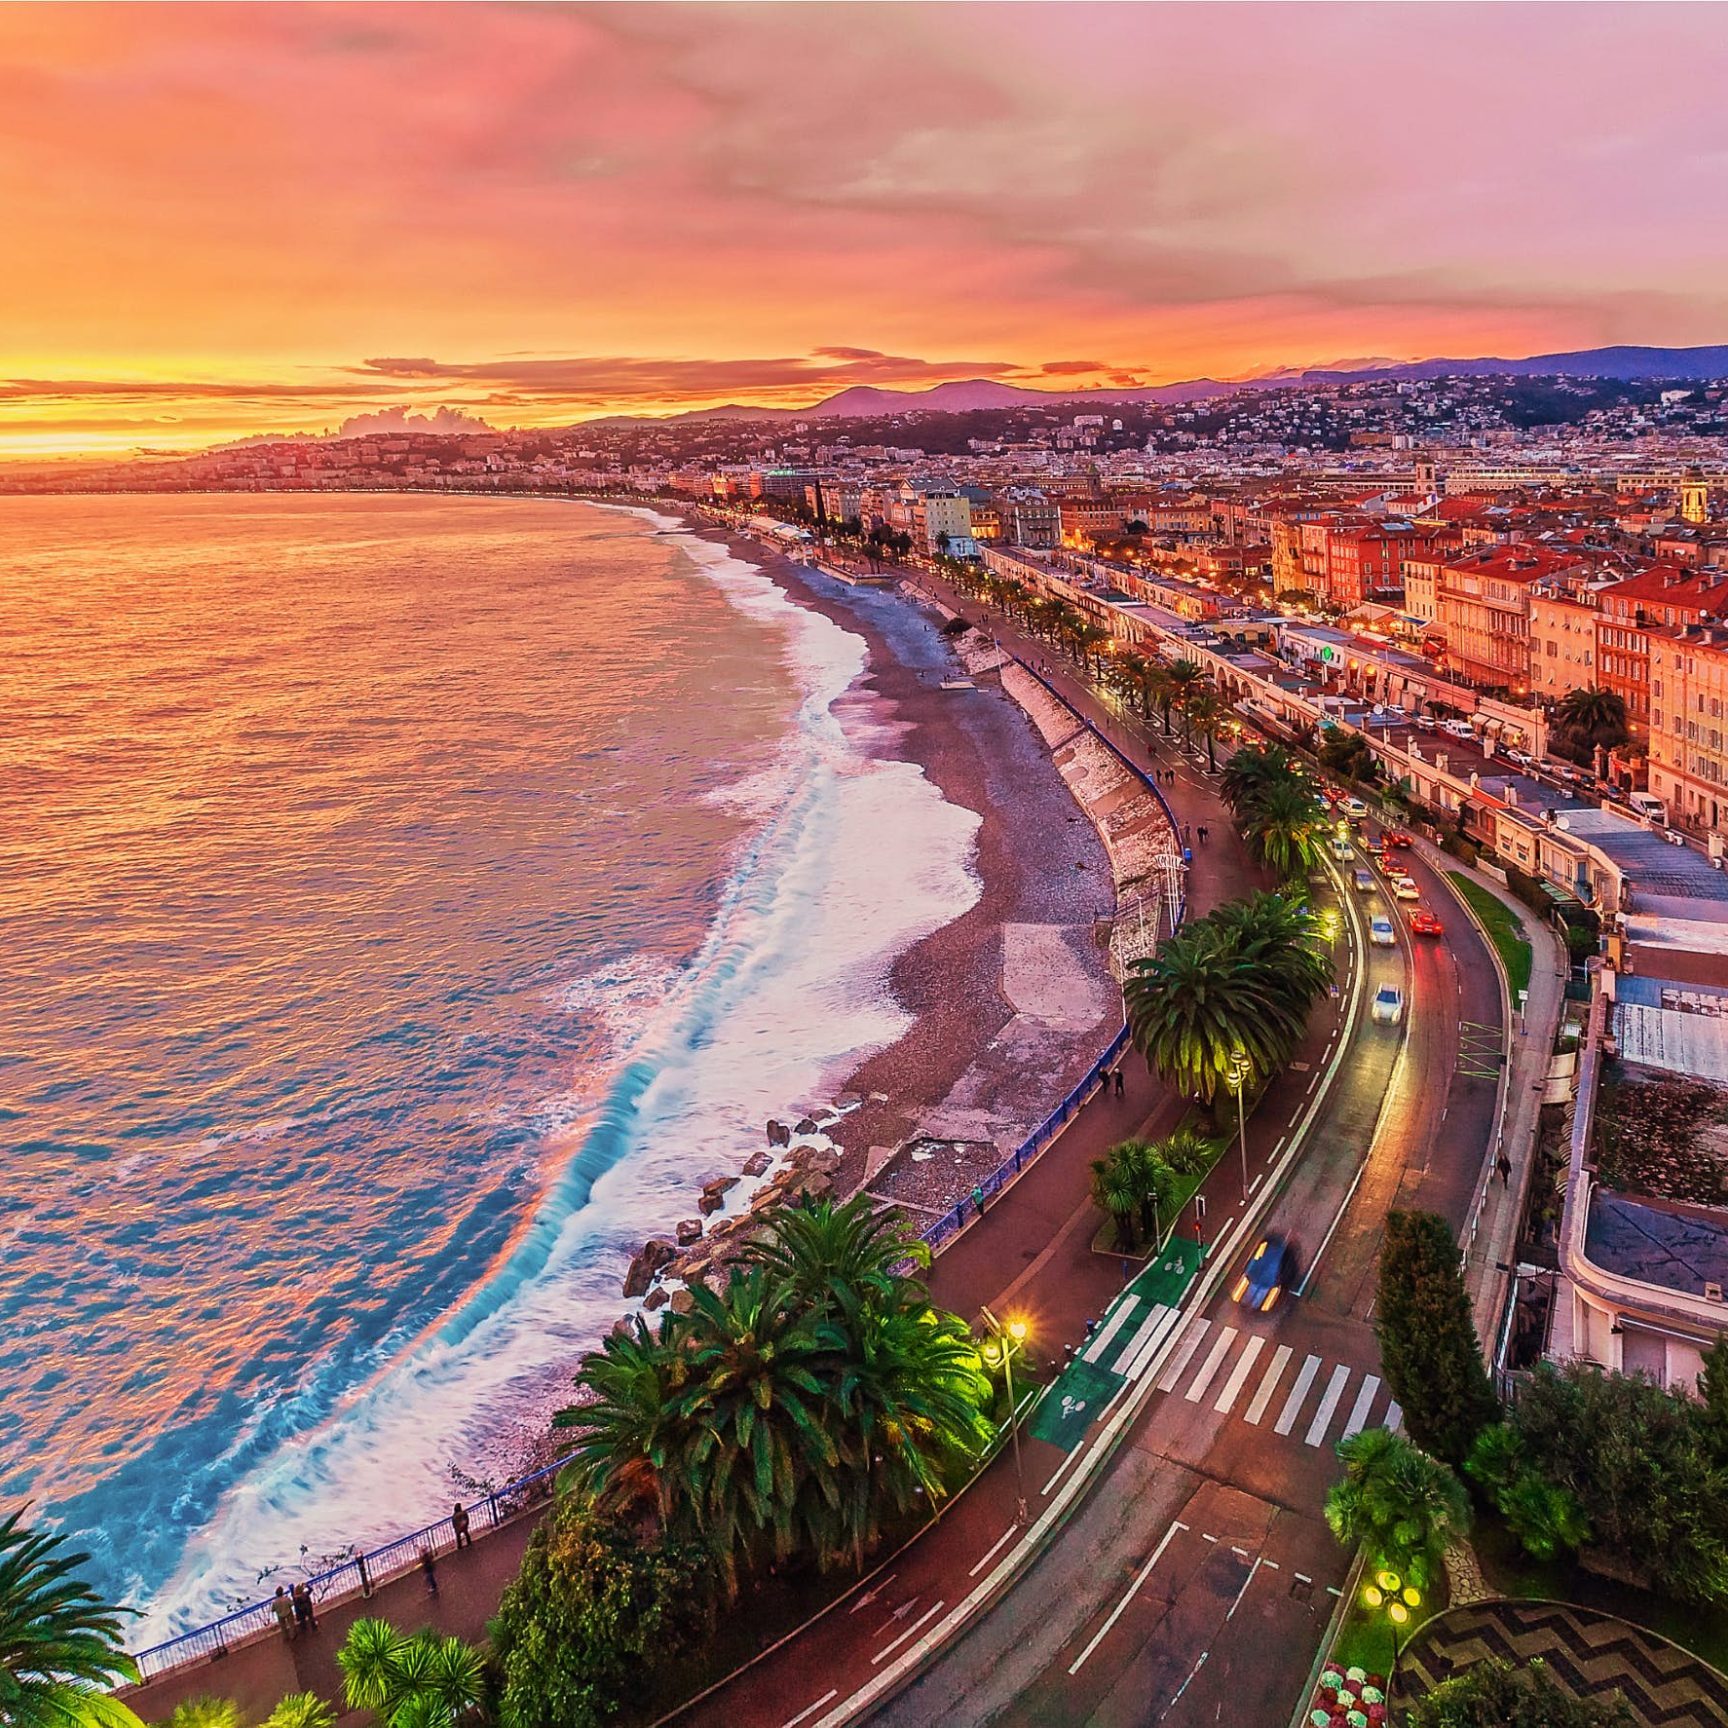 Nice landscape at sunset in France, a popular destination for private aircraft charter